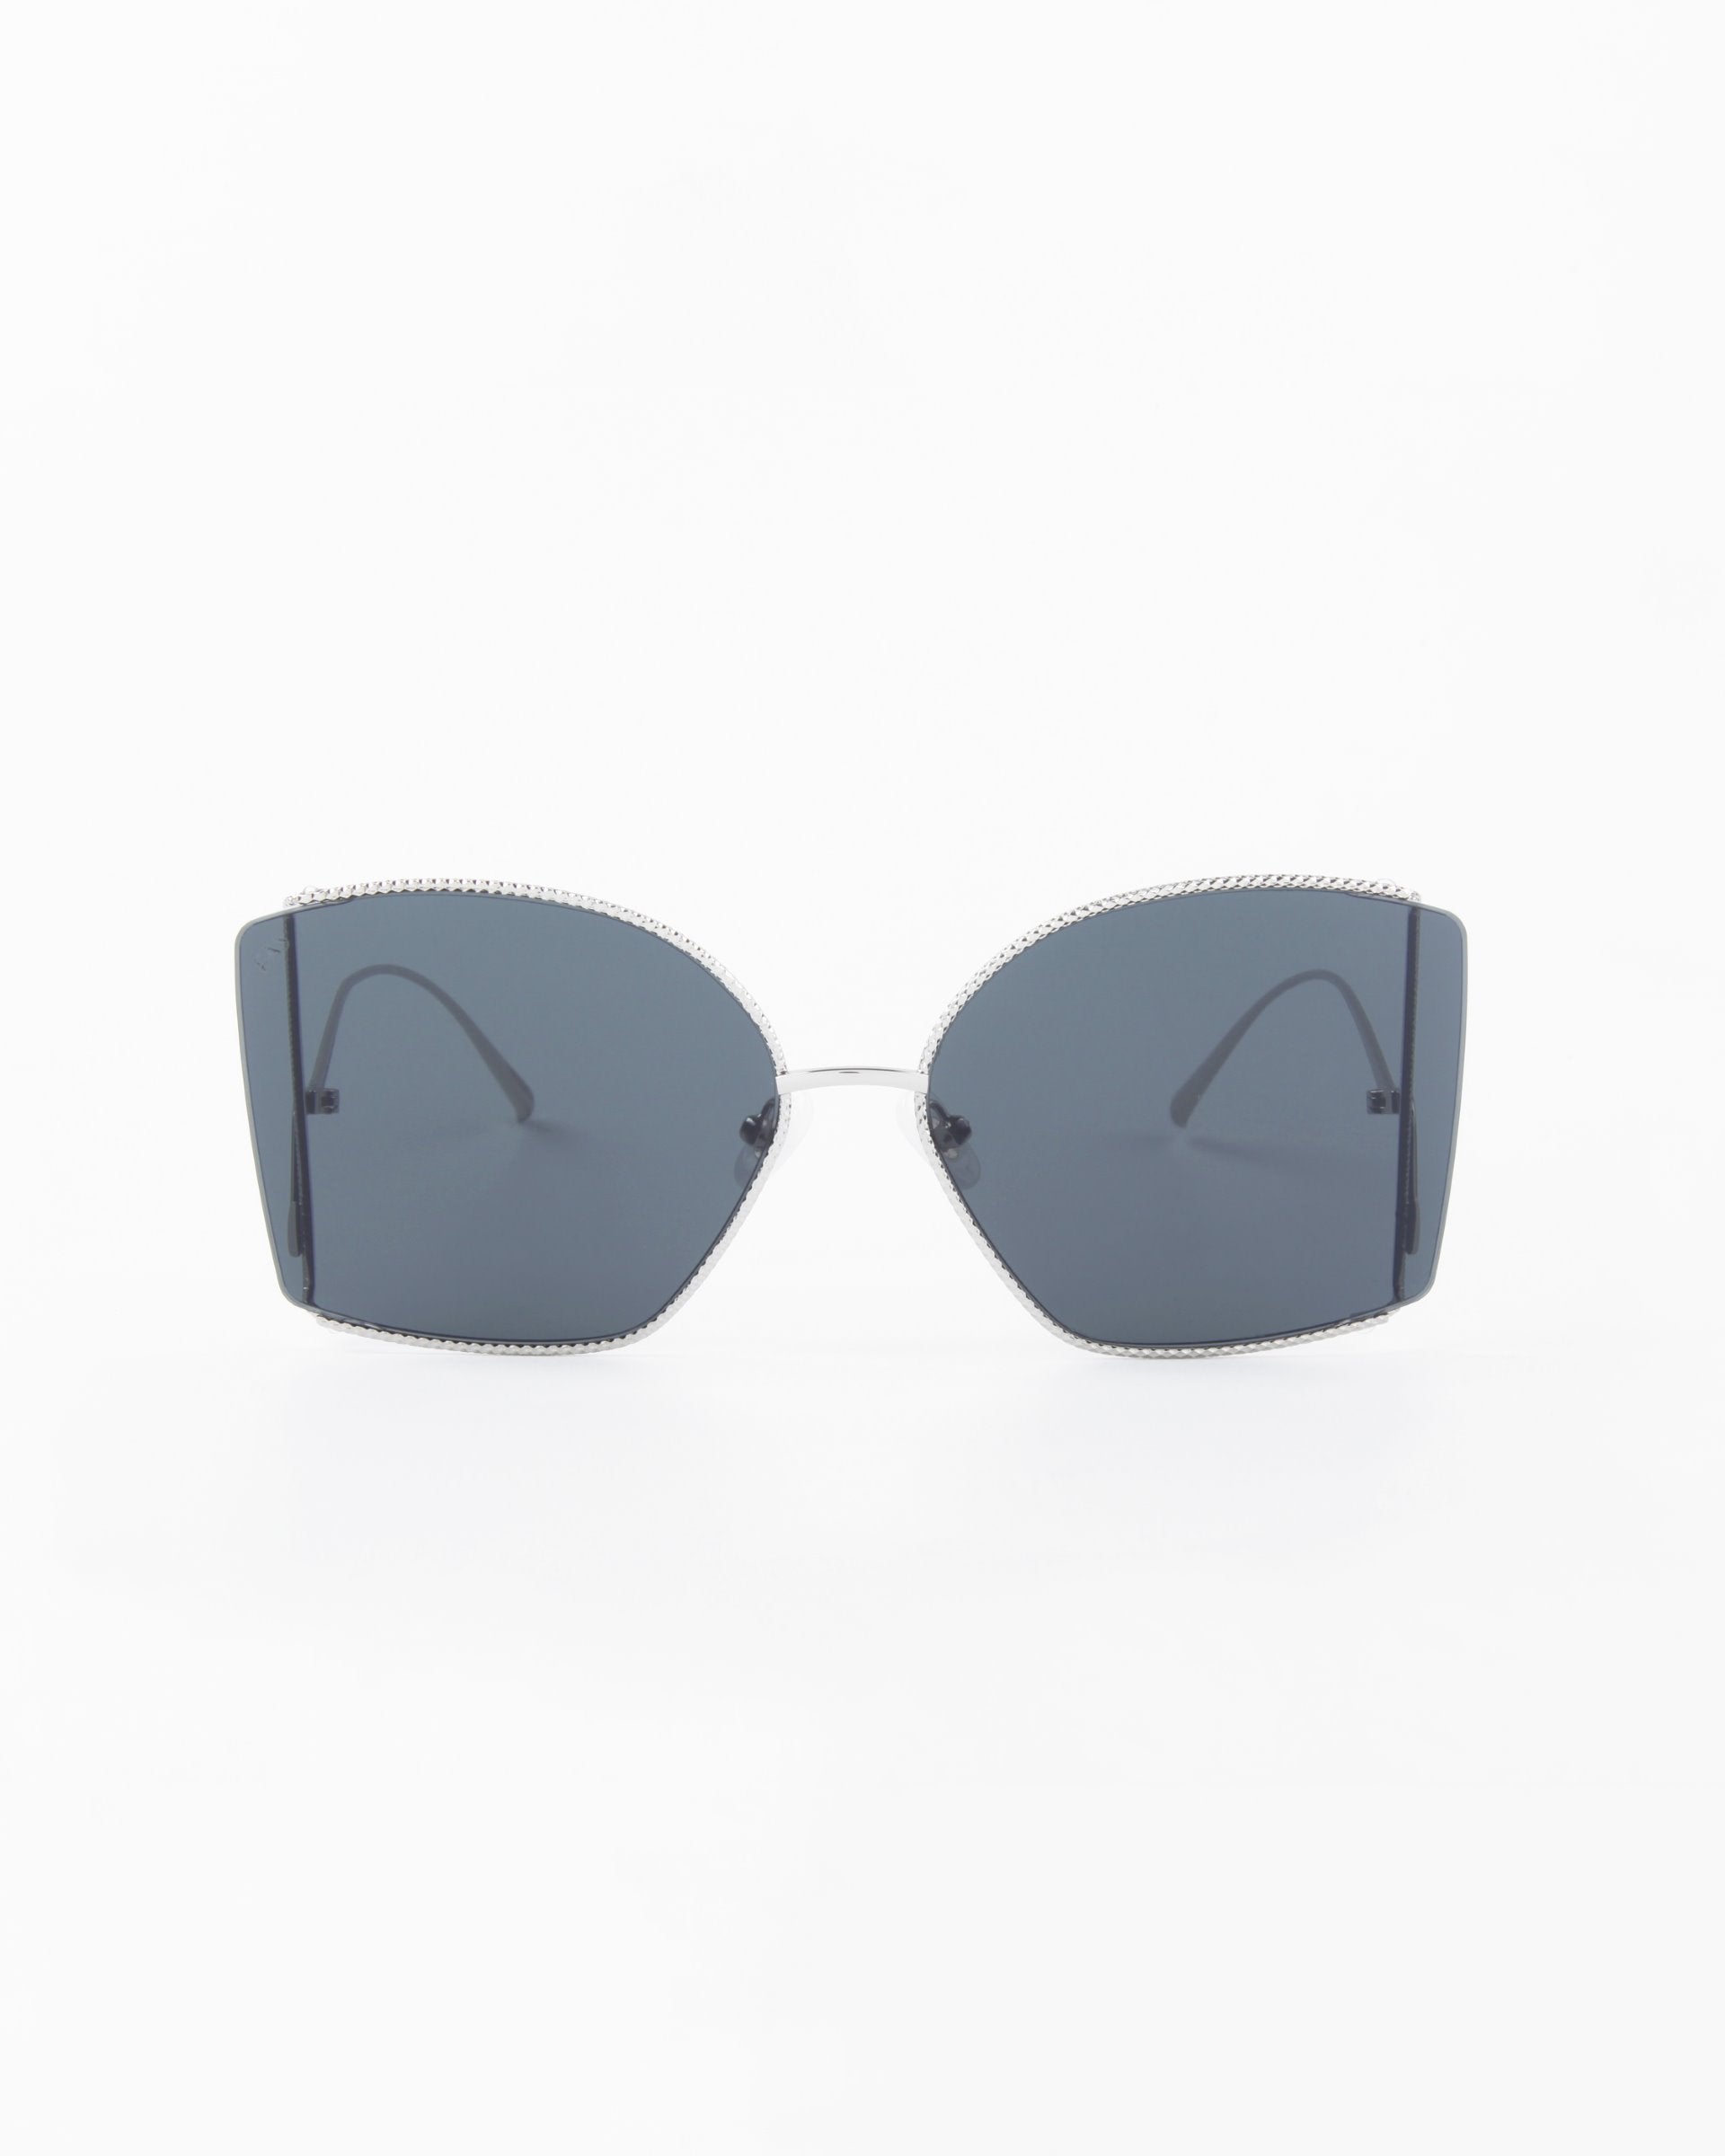 A pair of Dixie sunglasses by For Art&#39;s Sake® with large, angular, dark lenses and thin, handmade gold-plated frames. The design is simple yet stylish, with a modern minimalist appearance. The background is plain white, emphasizing the sleek design of the Dixie sunglasses.